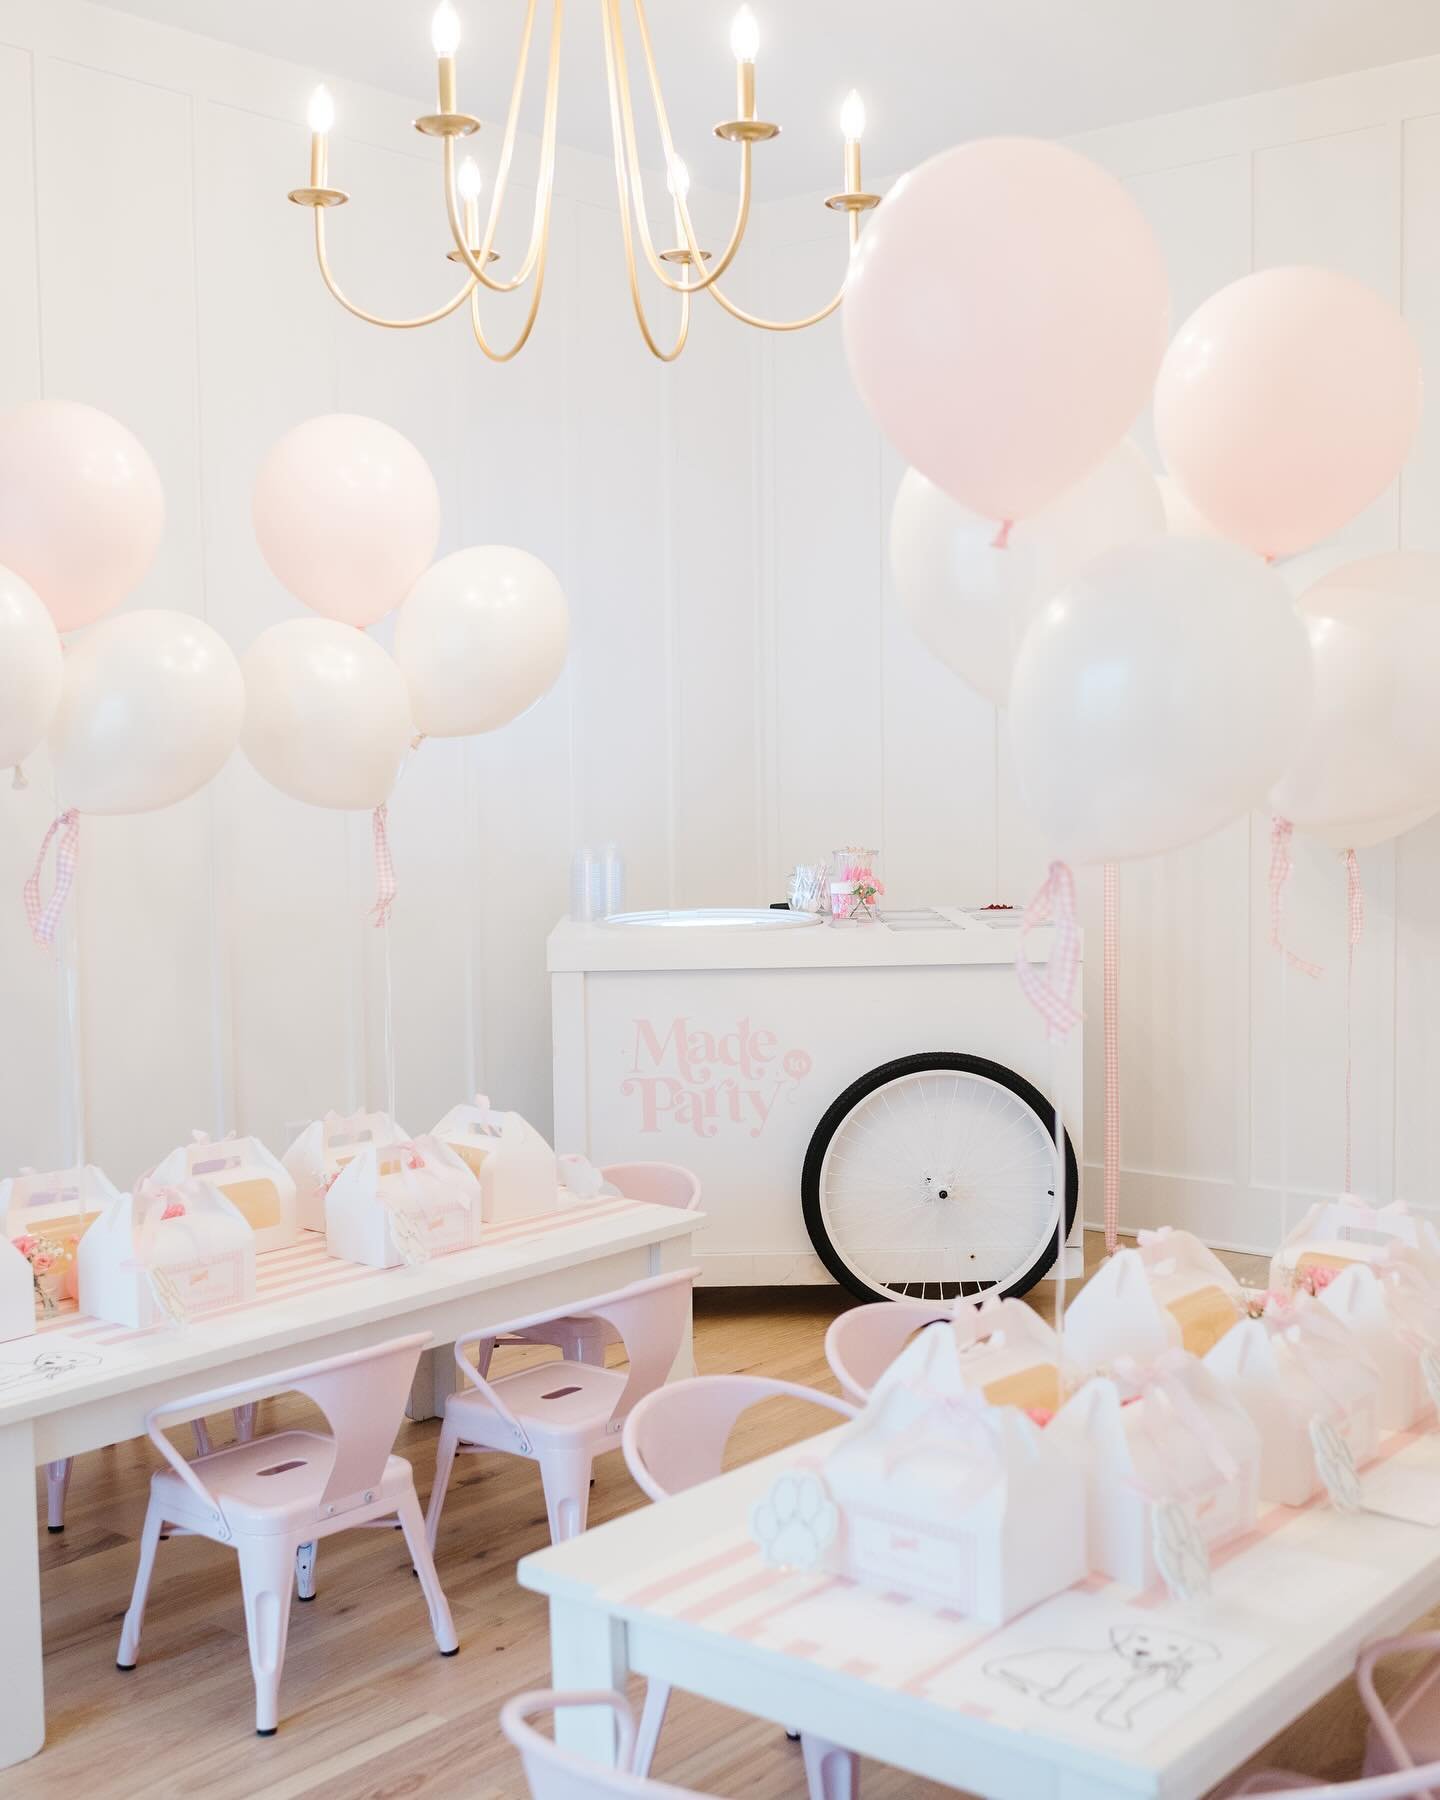 Spring is here  and summer is coming 🌞 🌸 Don&rsquo;t miss out on booking our adorable ice cream cart 🍦🍨 Perfect for any occasion! 

Photography by @erinreid_photography 
#icecream #icecreamcart #icecreamparty #balloondecor #atlparties #cummingga 